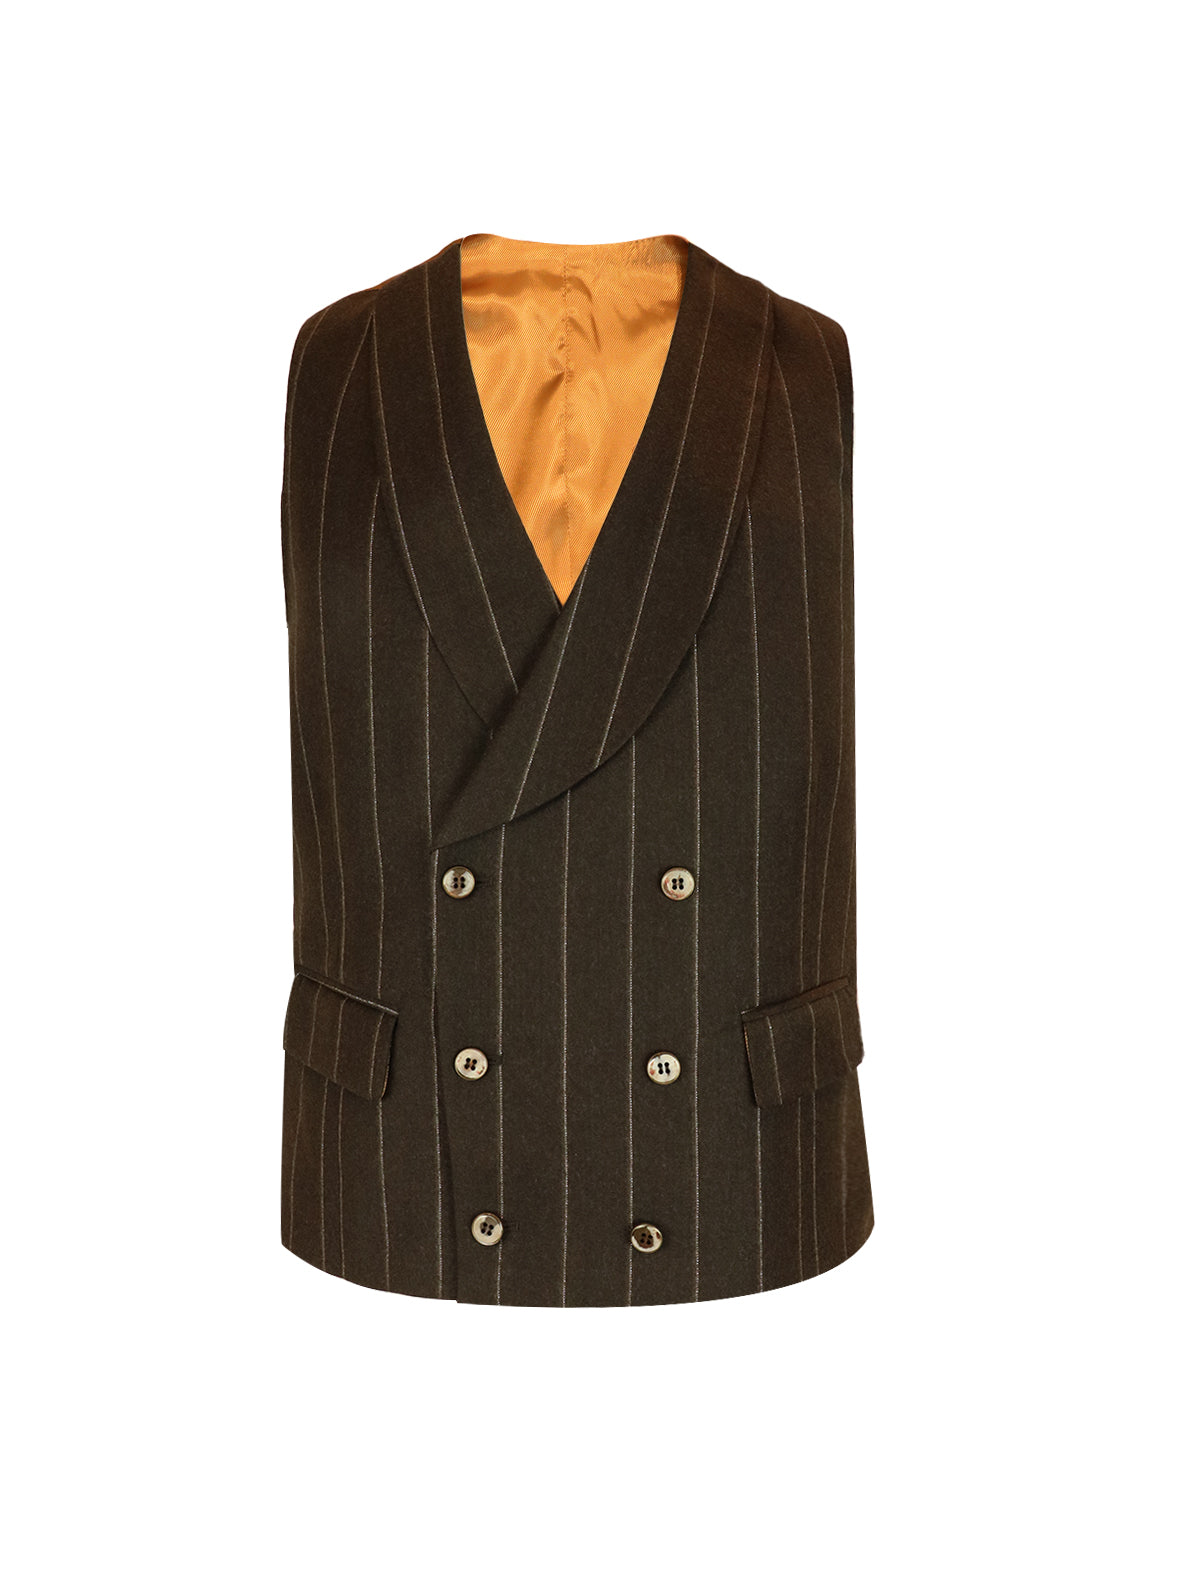 GABRIELE PASINI Double-Breasted Vest in Brown & Silver Stripes